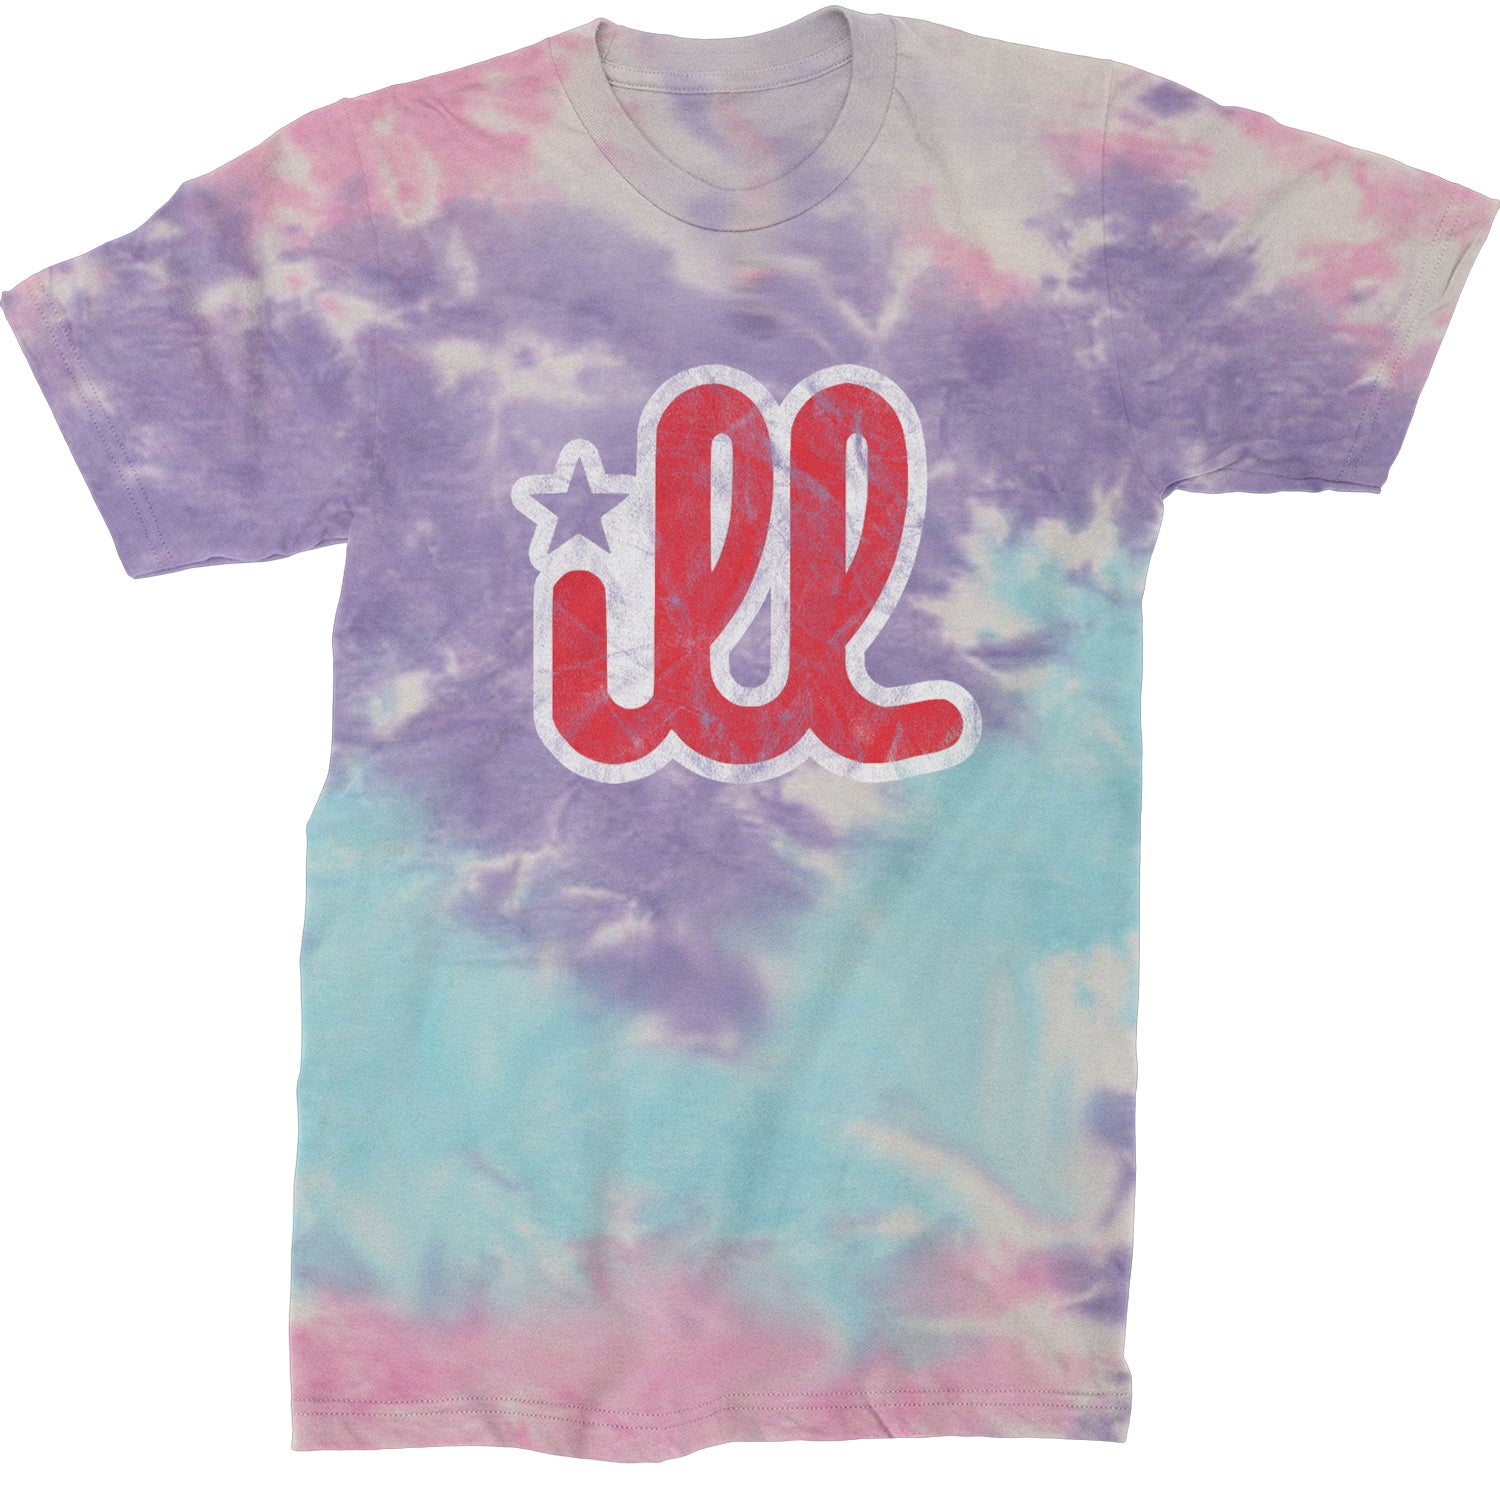 ILL Vintage It's A Philadelphia Philly Thing Mens T-shirt Tie-Dye Cotton Candy